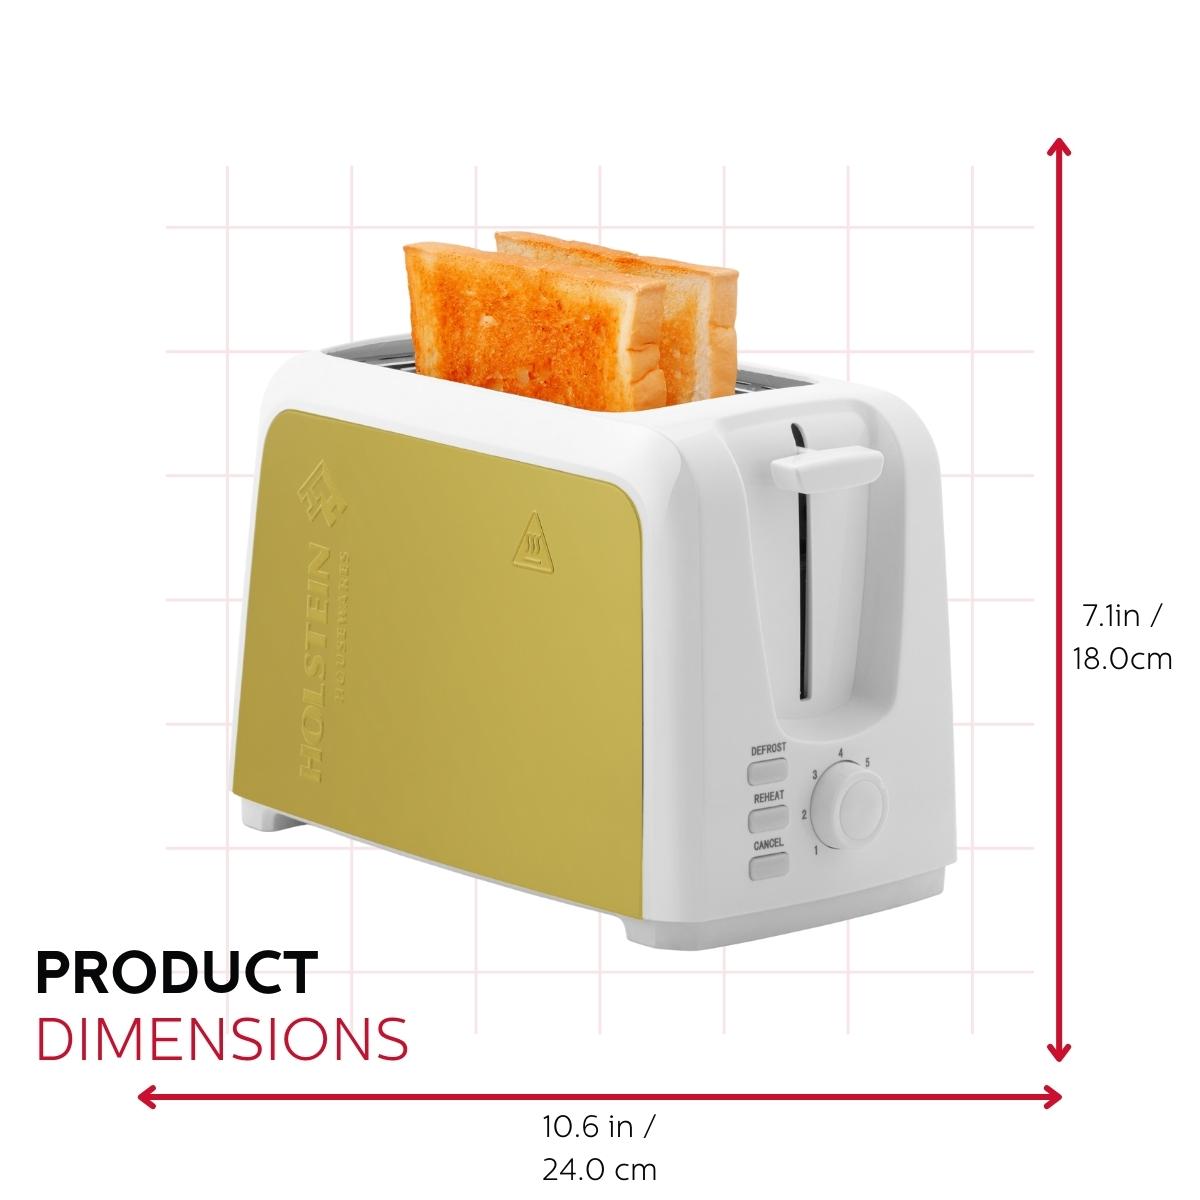 2-SLICE TOASTER WHITE & GOLD COLOR